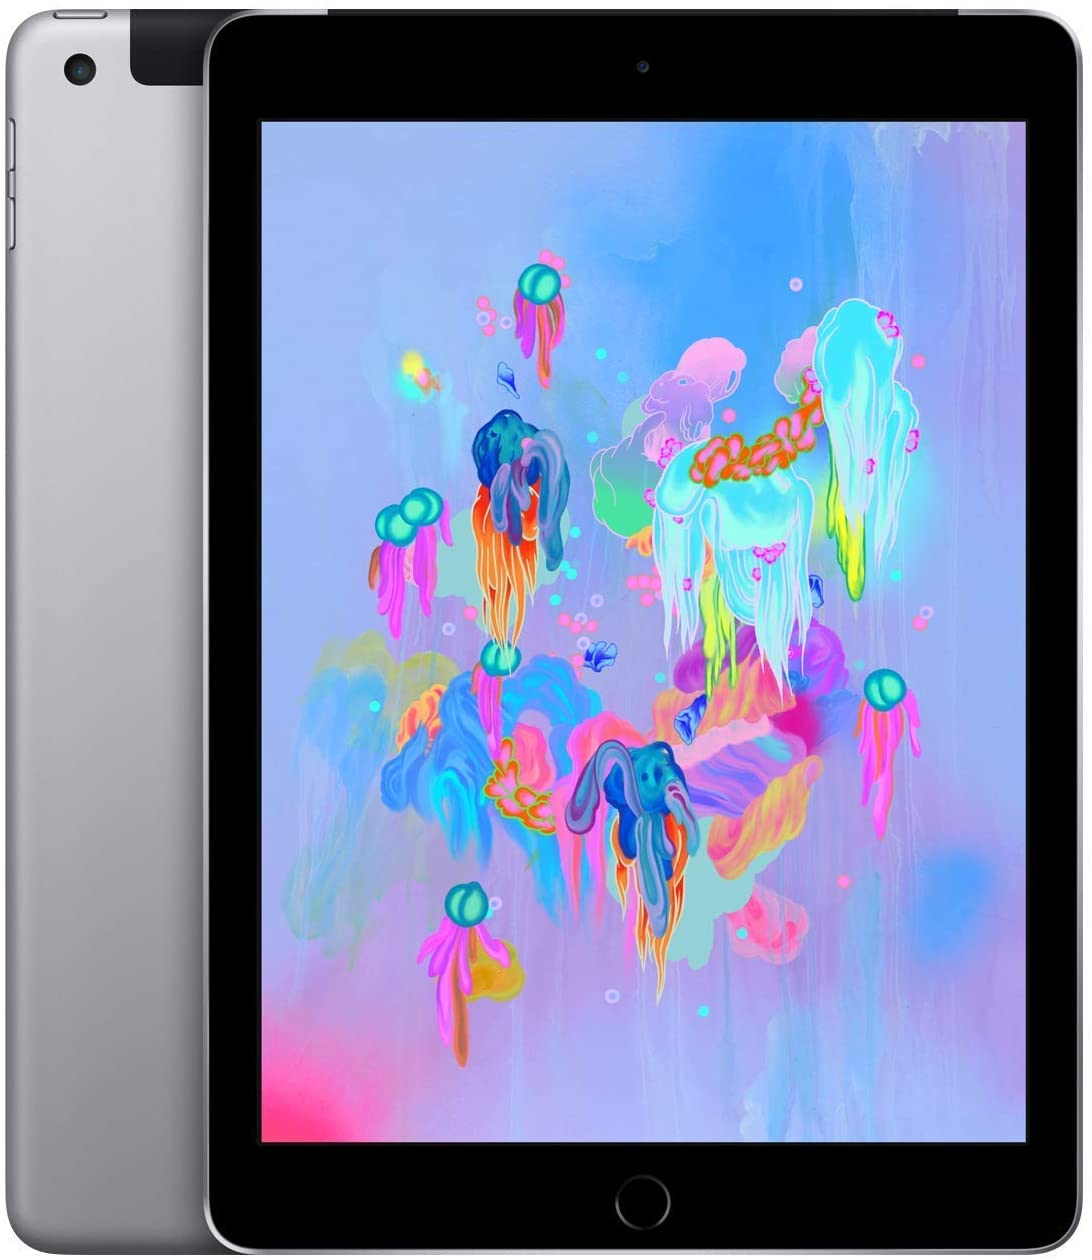 Apple iPad 6 32GB Wi-Fi + Cellular 3G/4G (Like New) New Glass Screen Protector, Shipping